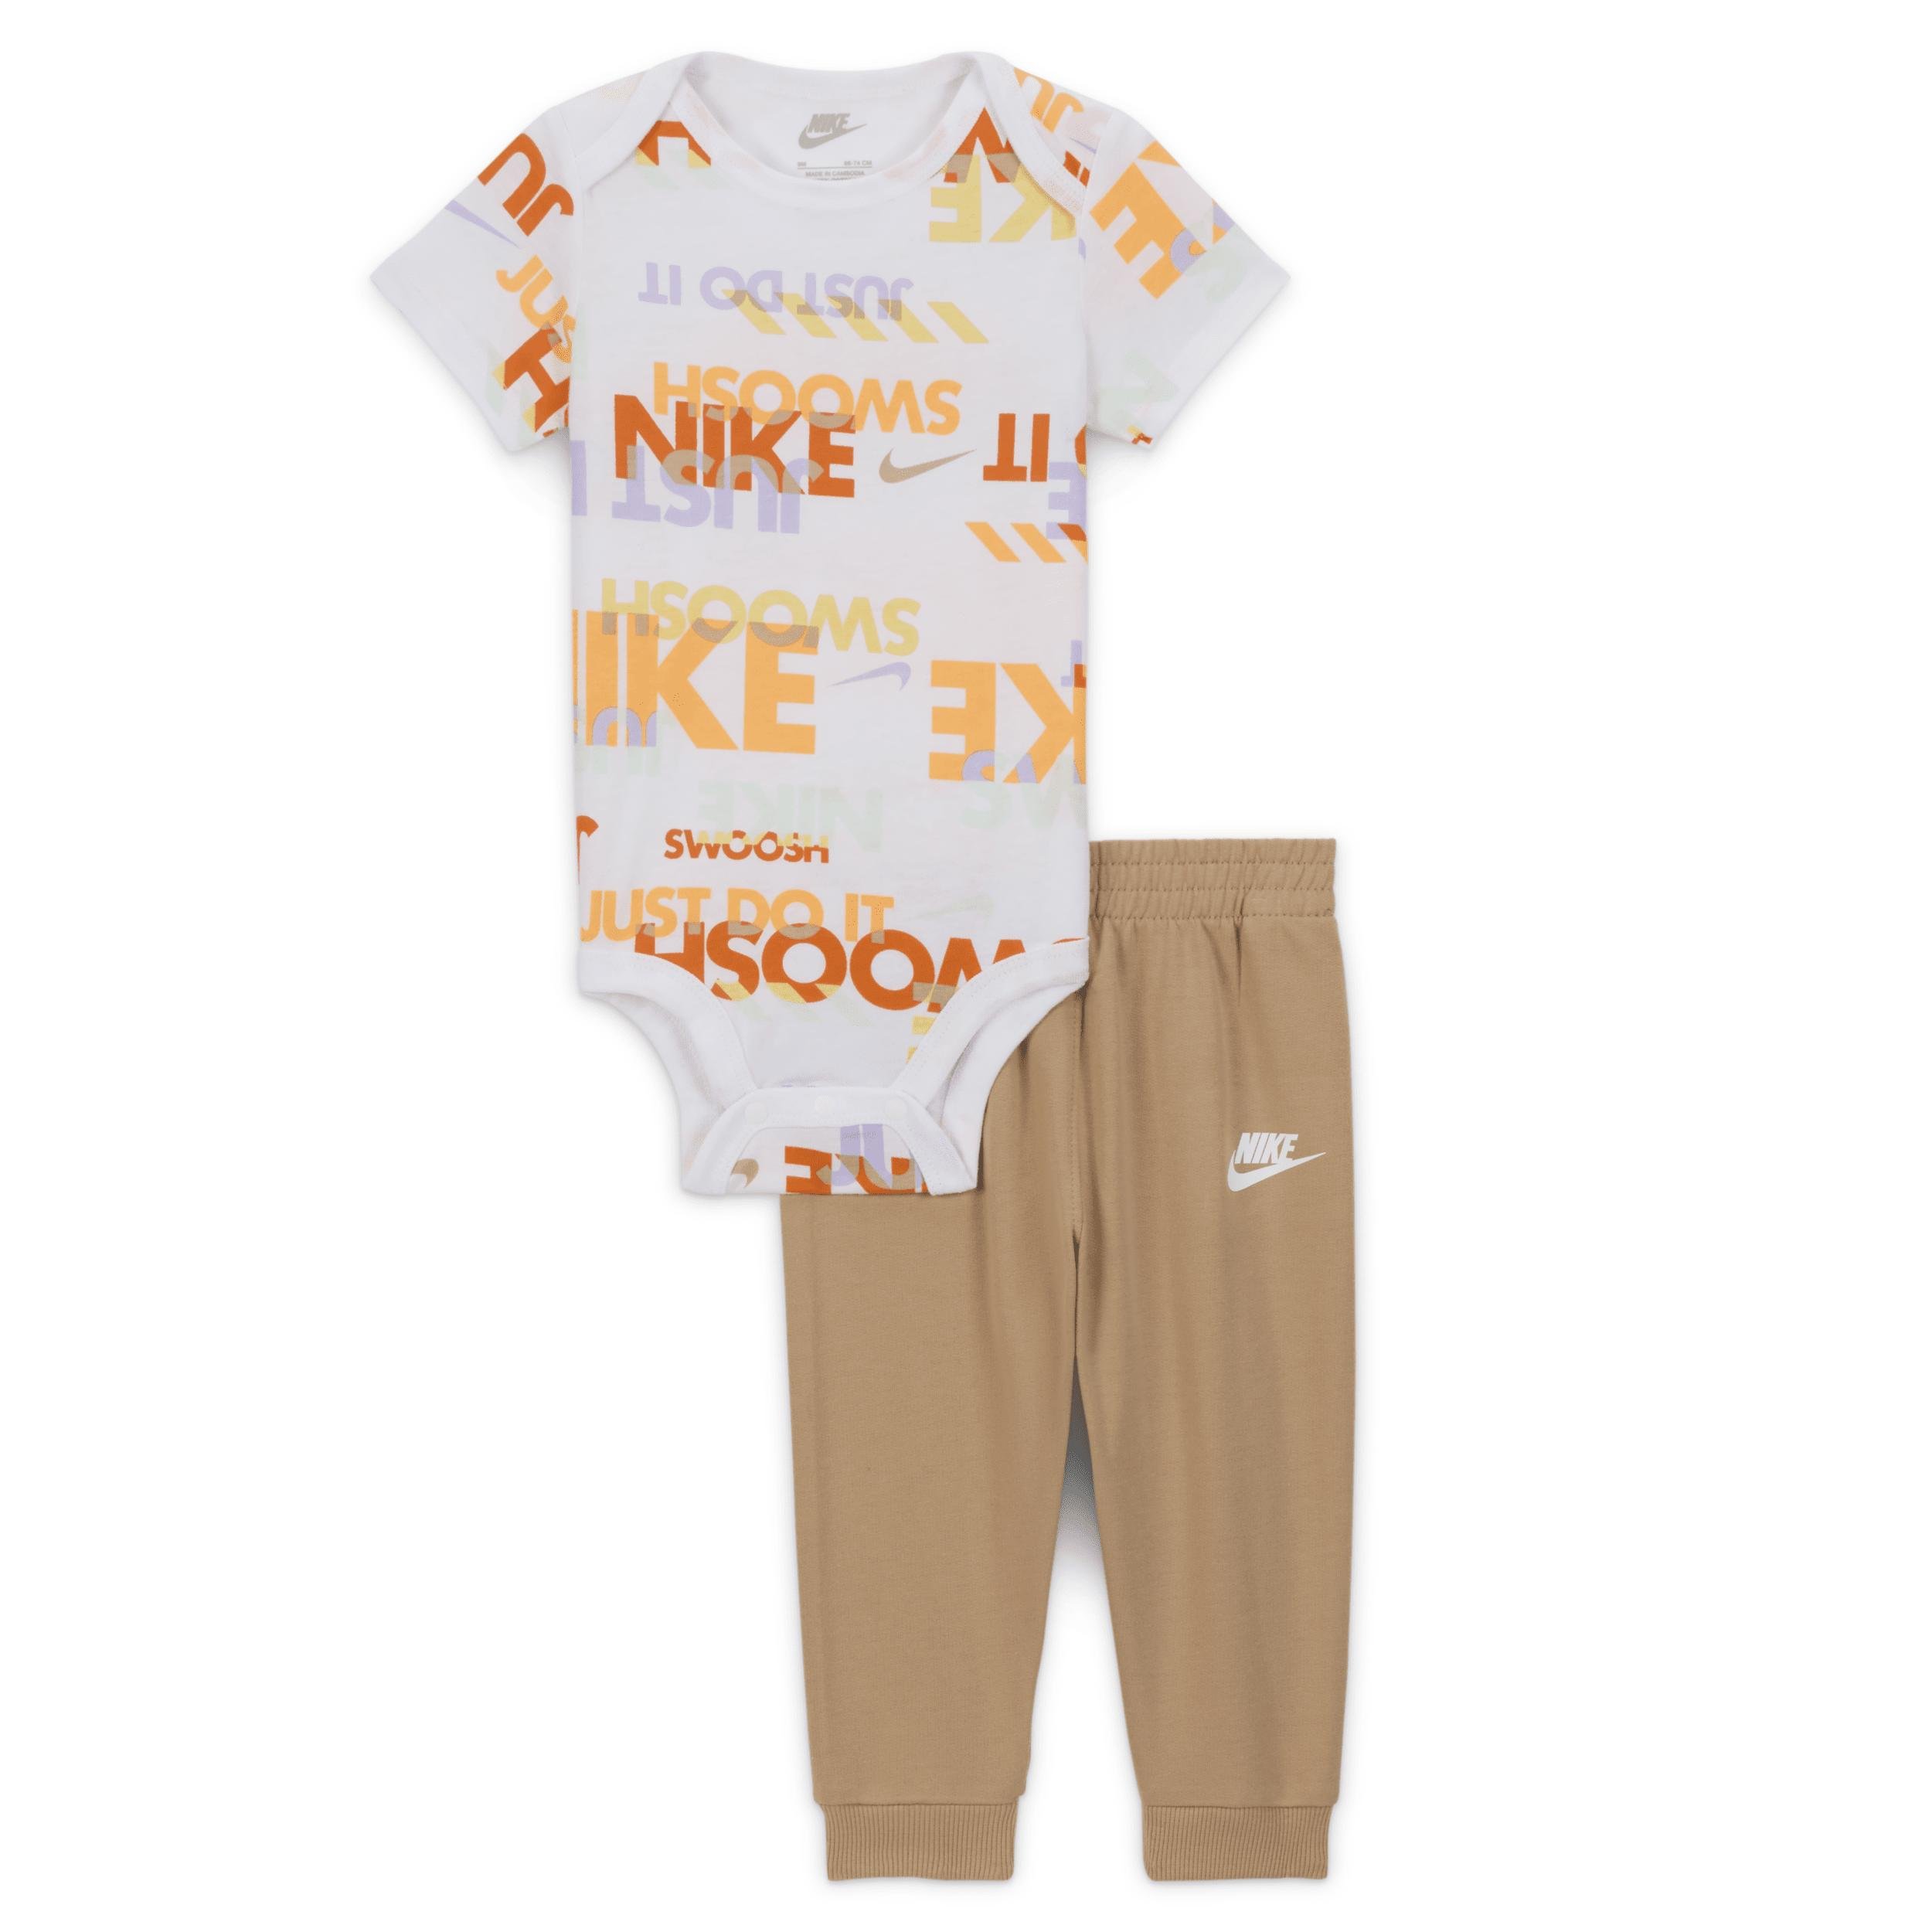 Nike Sportswear Playful Exploration Baby (0-9M) Printed Bodysuit and Pants Set by NIKE